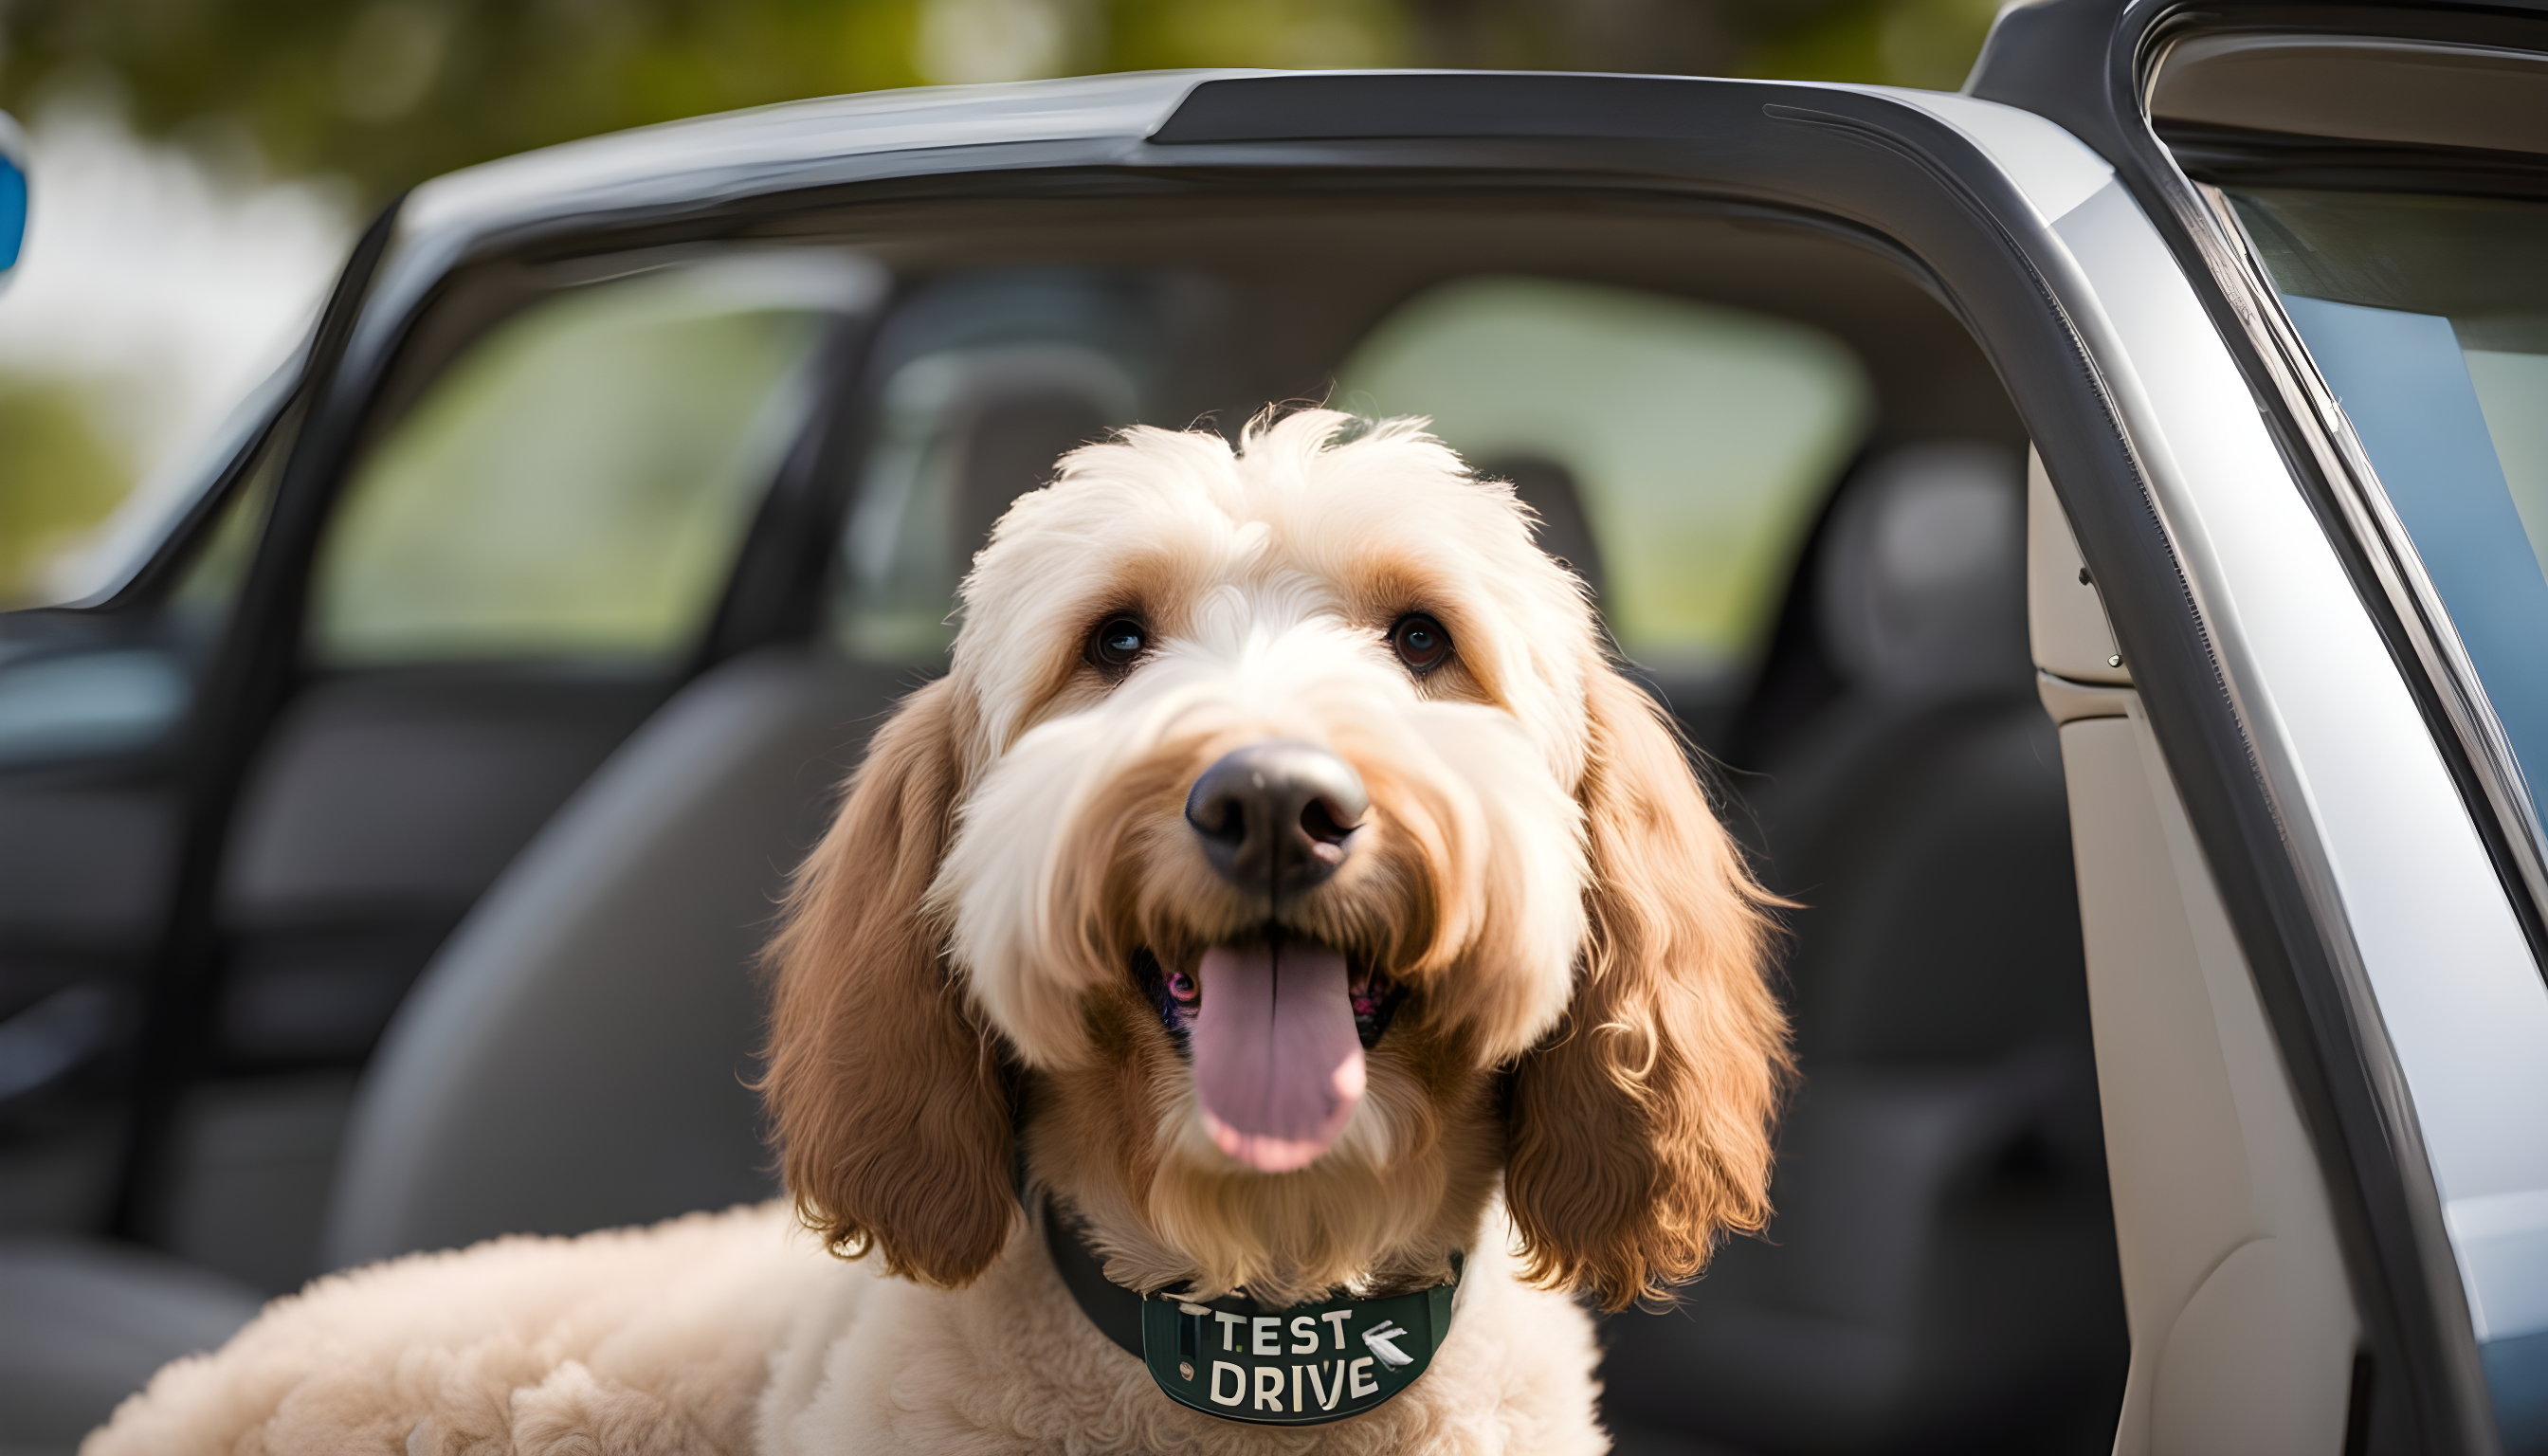 A Labradoodle wearing a 'Test Drive Available' license plate around its neck.